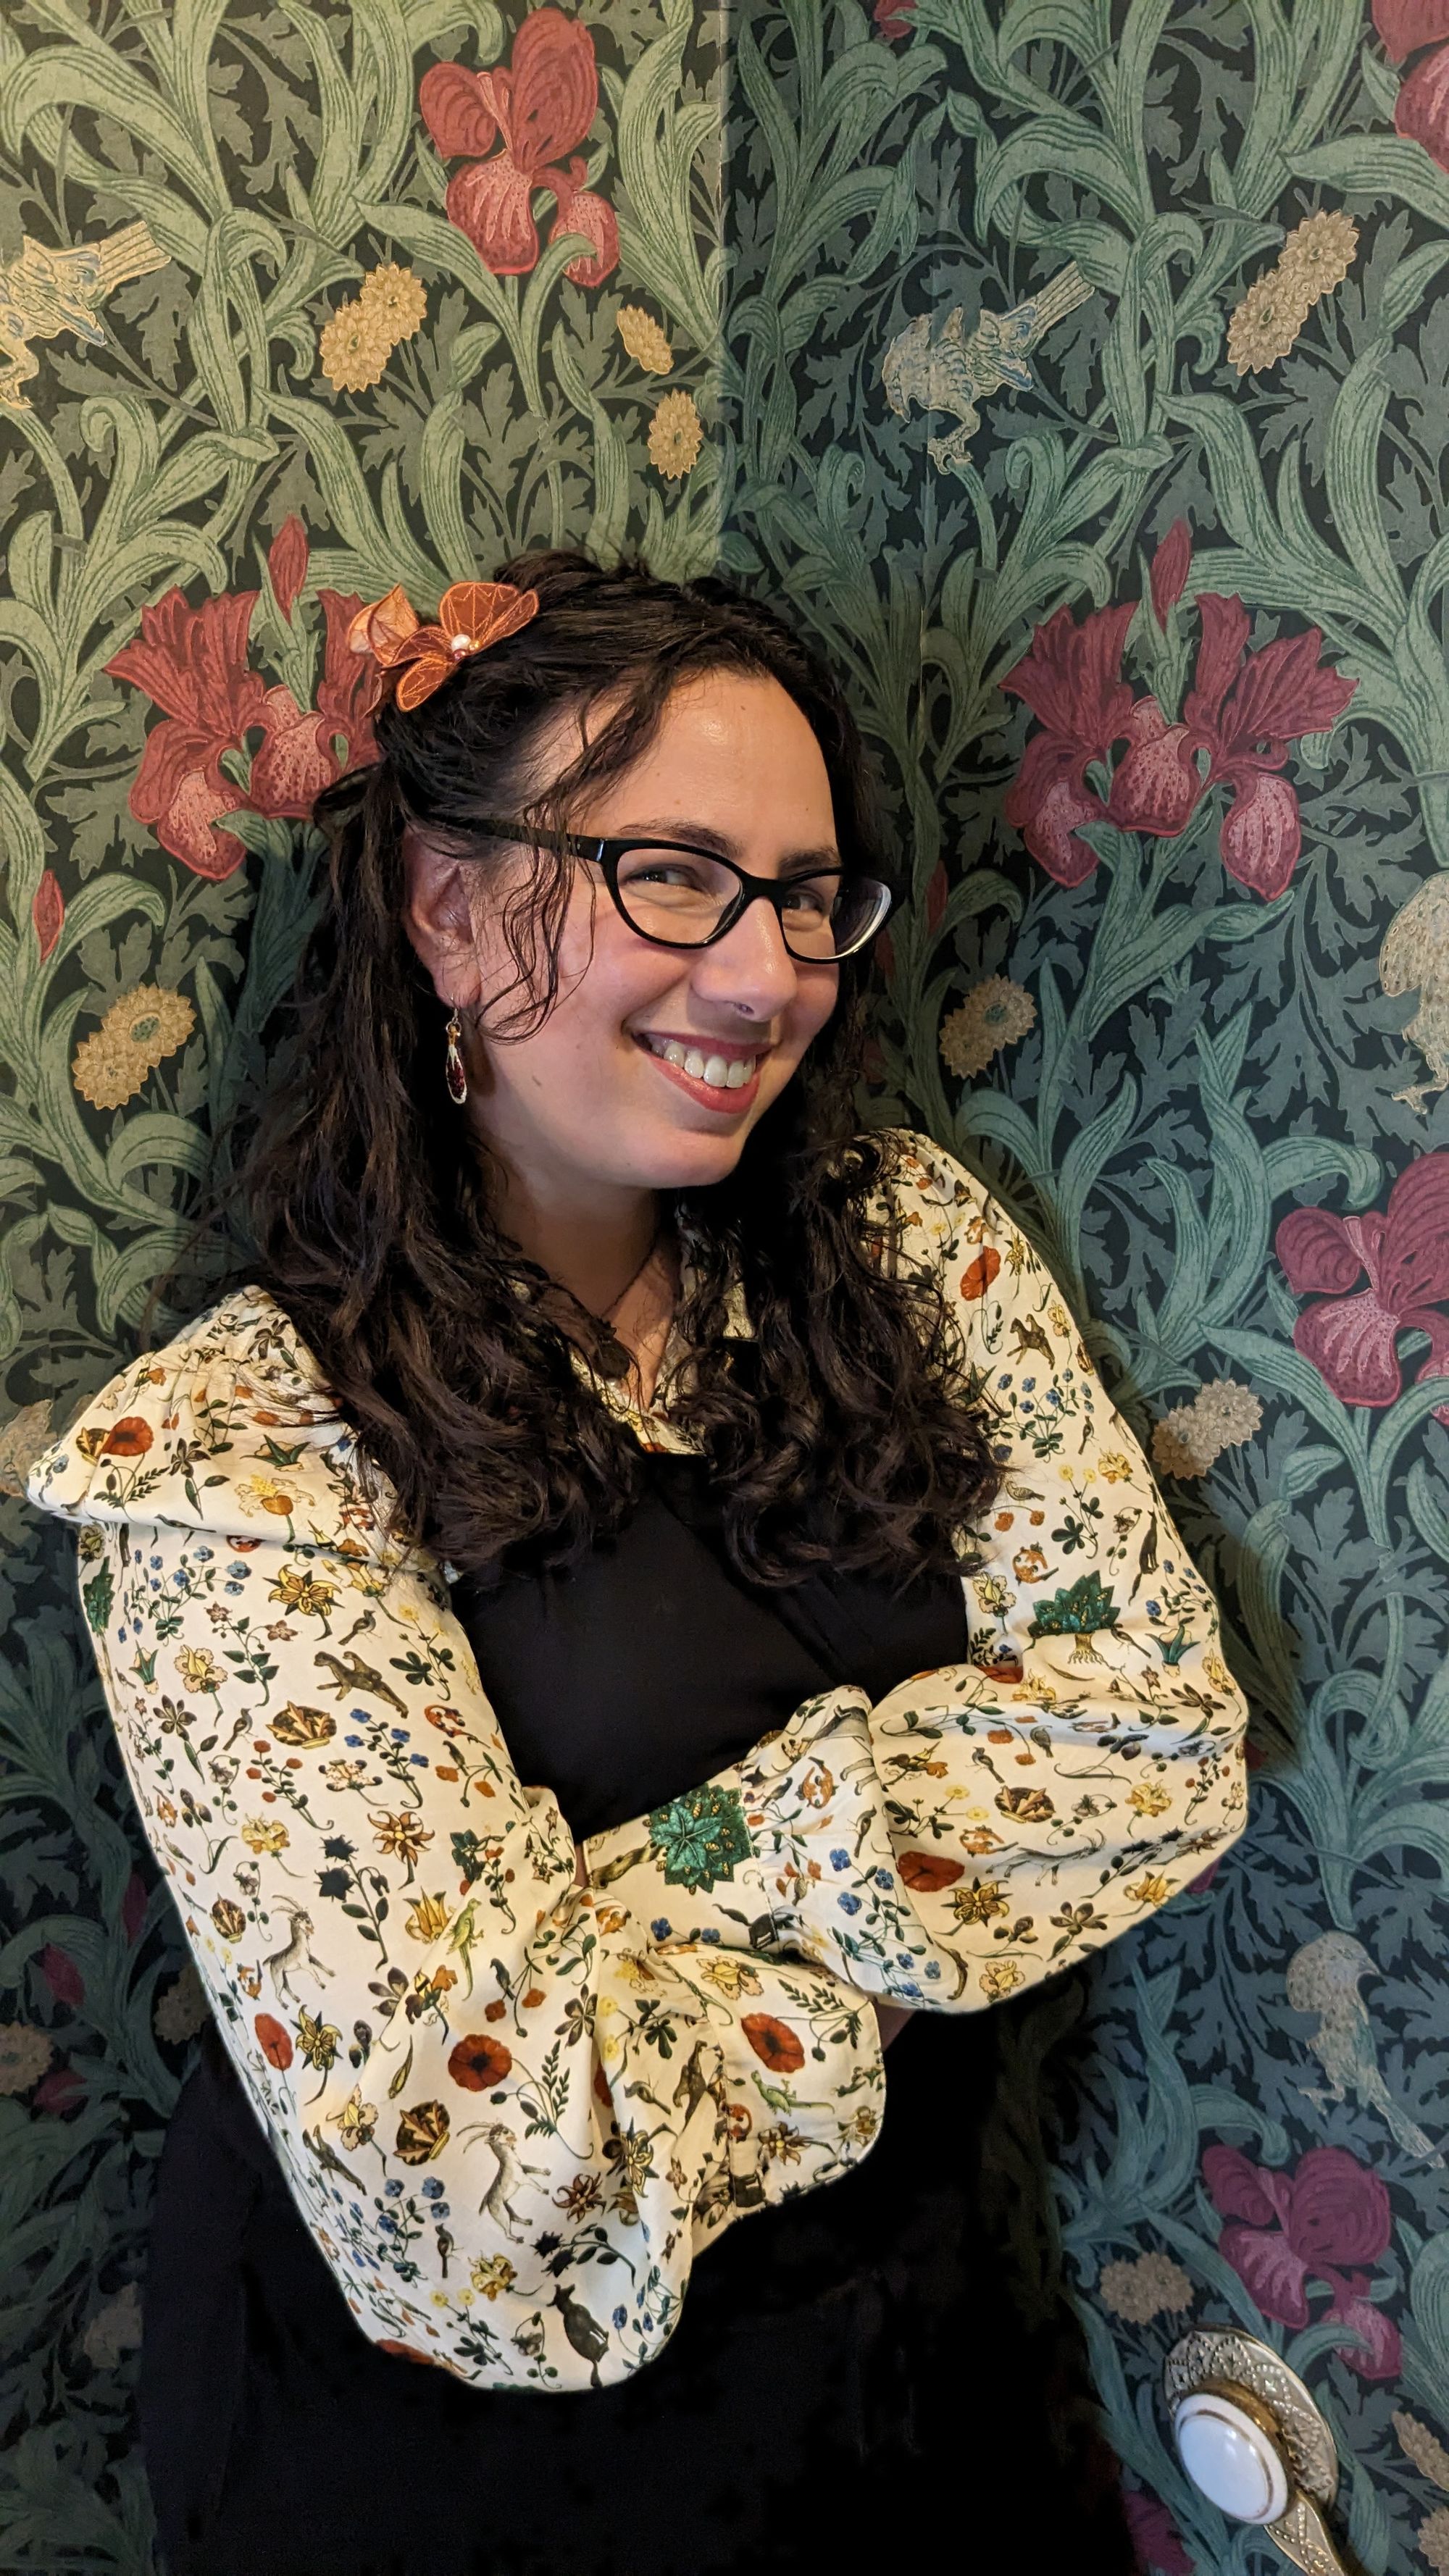 Photo of me in a beautifully wallpapered corner. The wallpaper is foliate, lush greens against a dark green background with pops of purple irises and pale silhouettes of birds. I'm wearing my long dark hair dark in curling waves, with hand-painted pomegranate earrings by Luna Sangre, a red-brown silk hair flower by Betsie Withey, and a silk blouse with billowing sleeves in a medieval manuscript print, by Samantha Pleet, under a black jumpsuit. My arms are crossed and I'm smiling. 